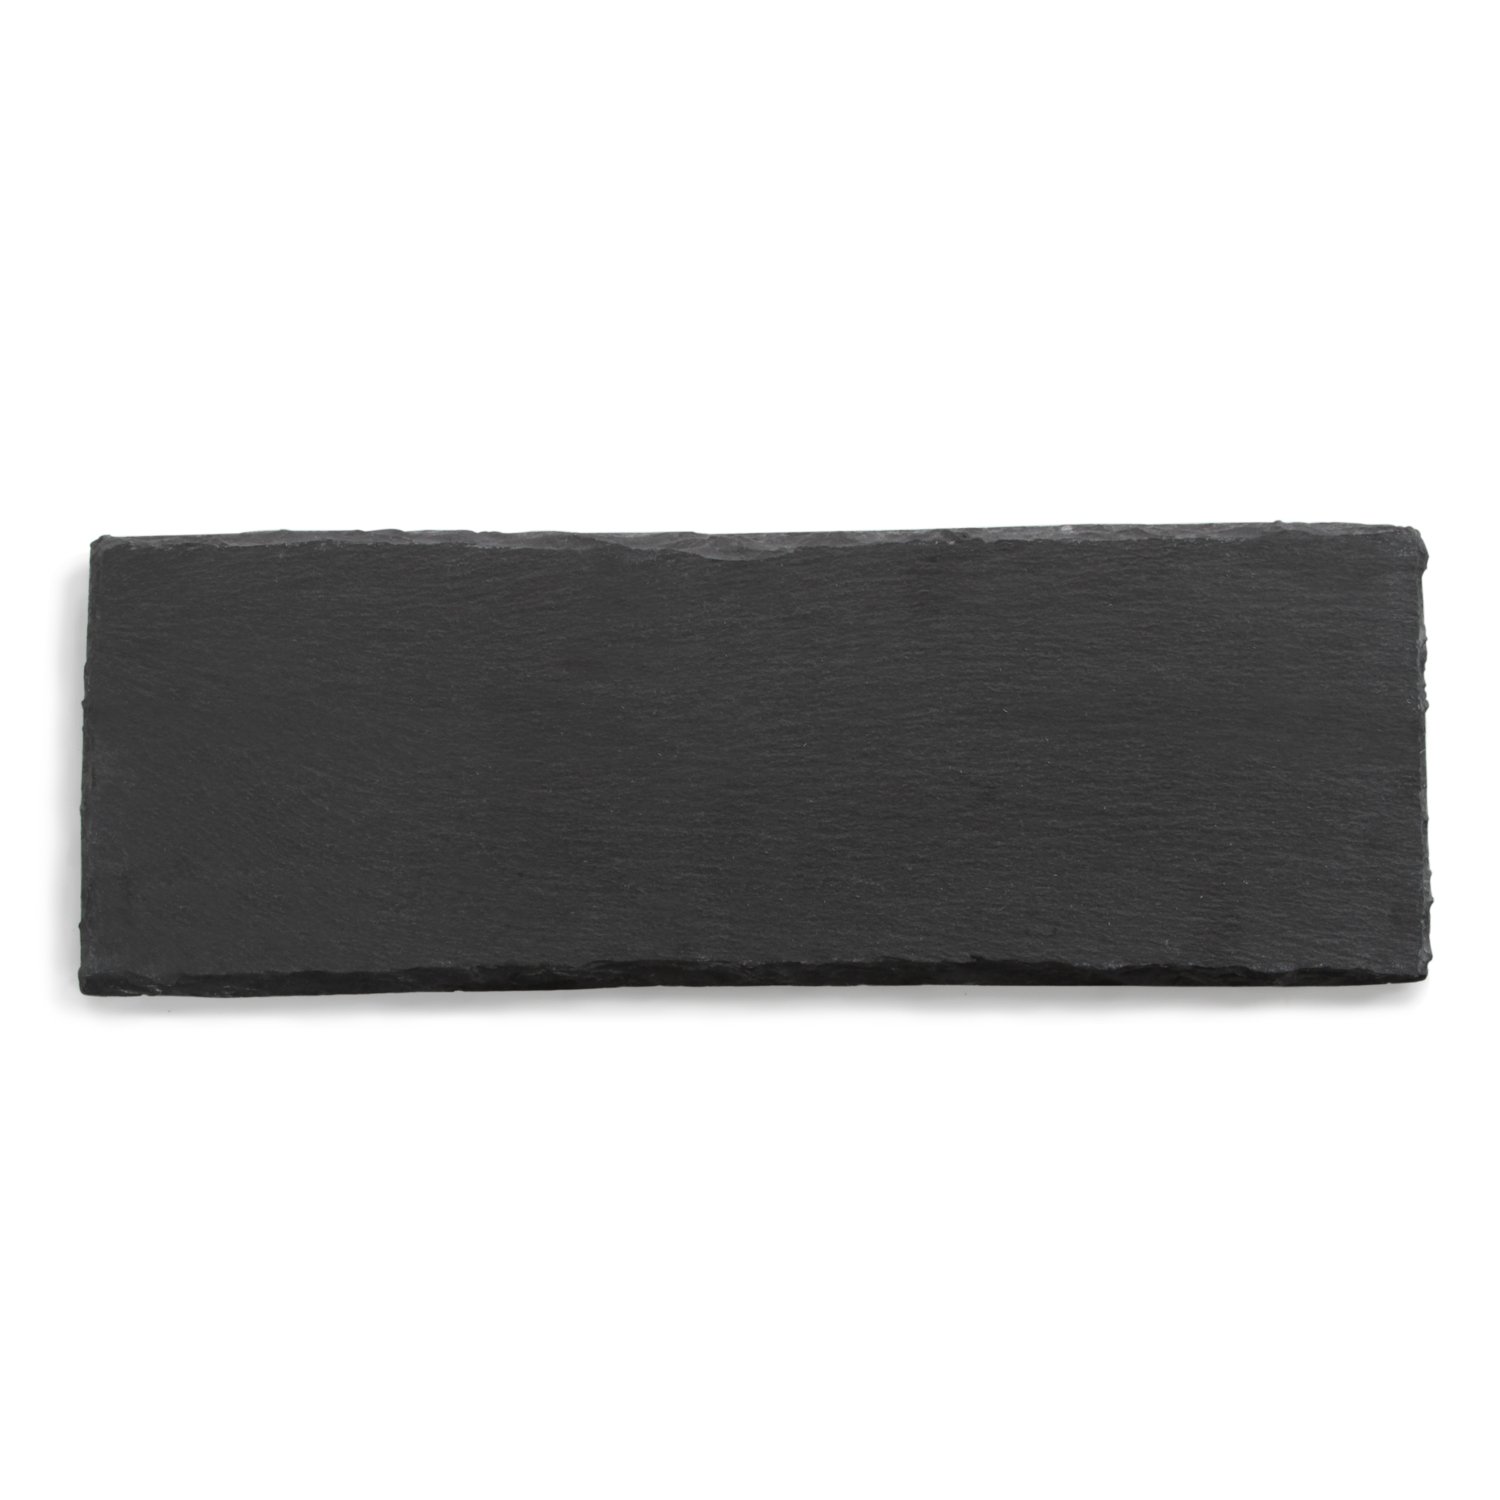 High Quality for Black Rocks -  Amazon hot selling Cheese Board Hand Cut Edge Pro Collection – Shunstone